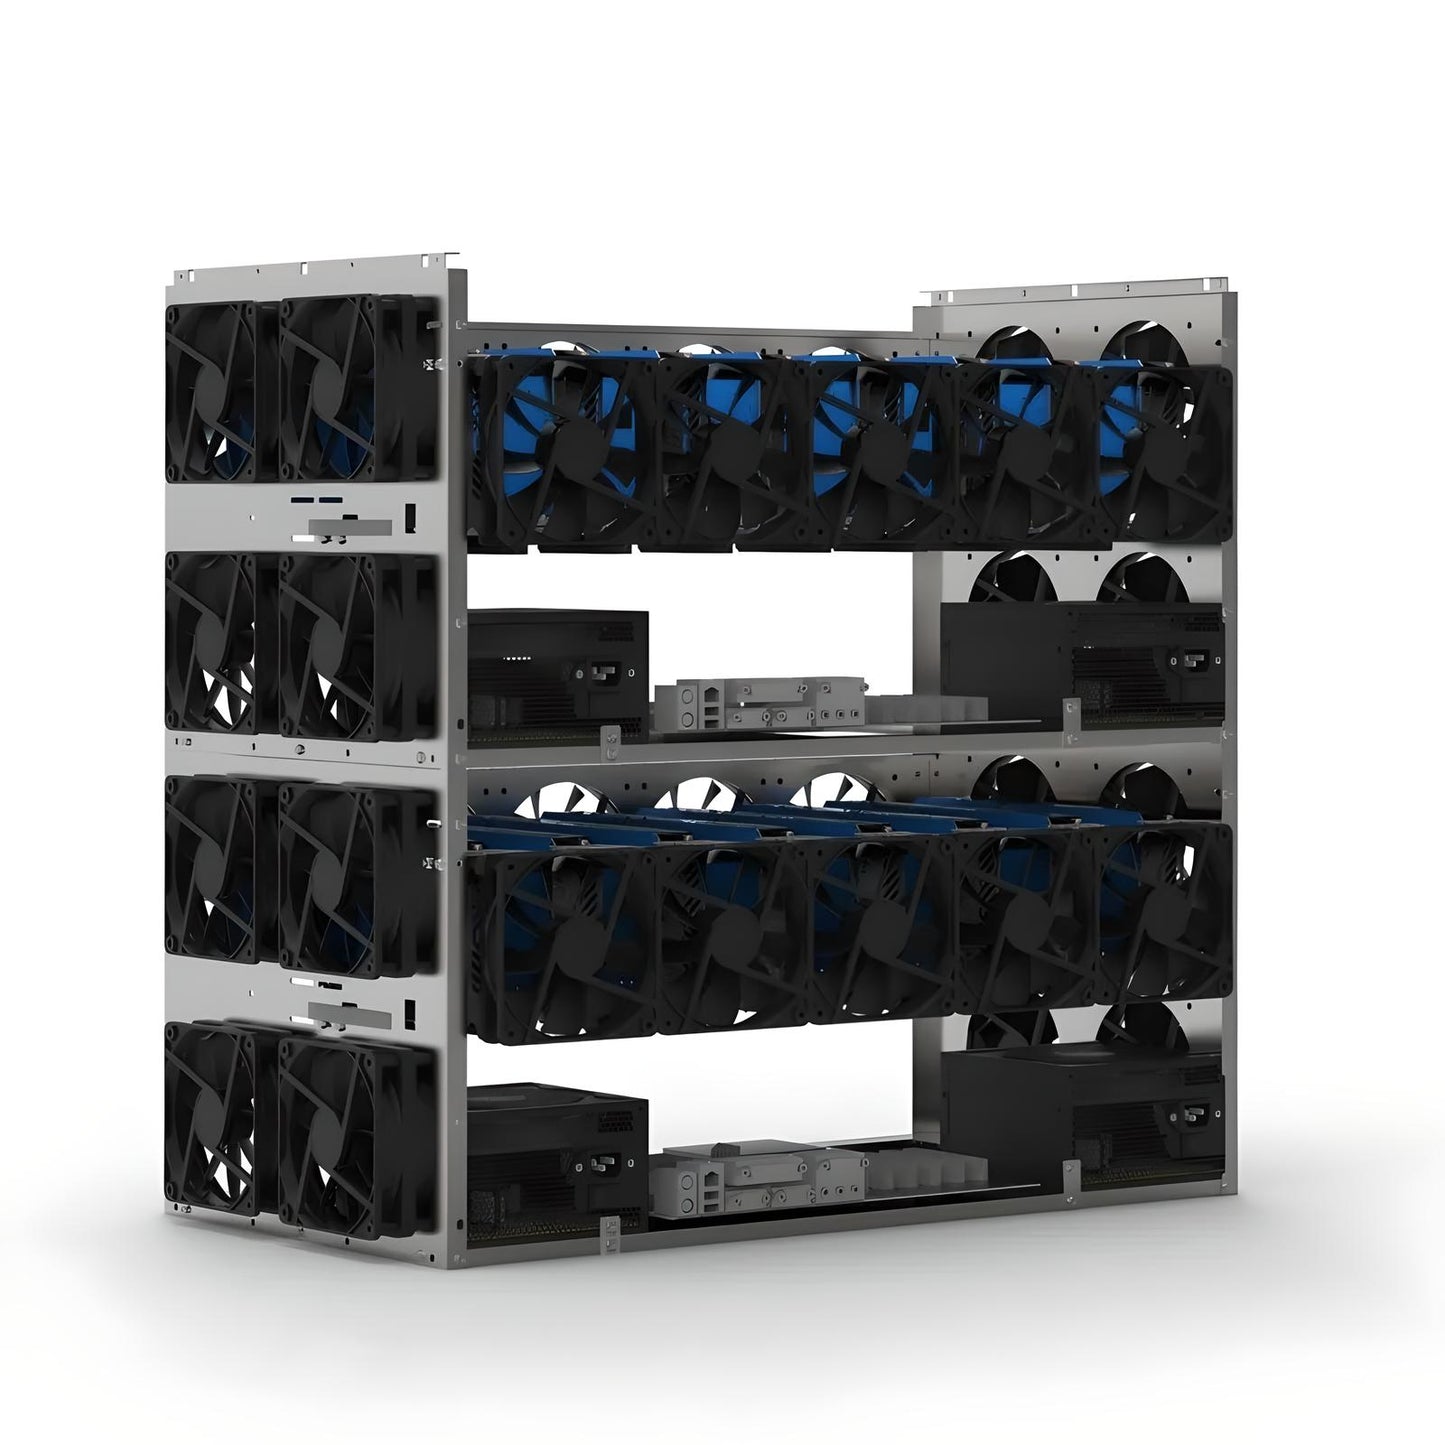 6-10 GPU Stackable Open Air Mining Frame